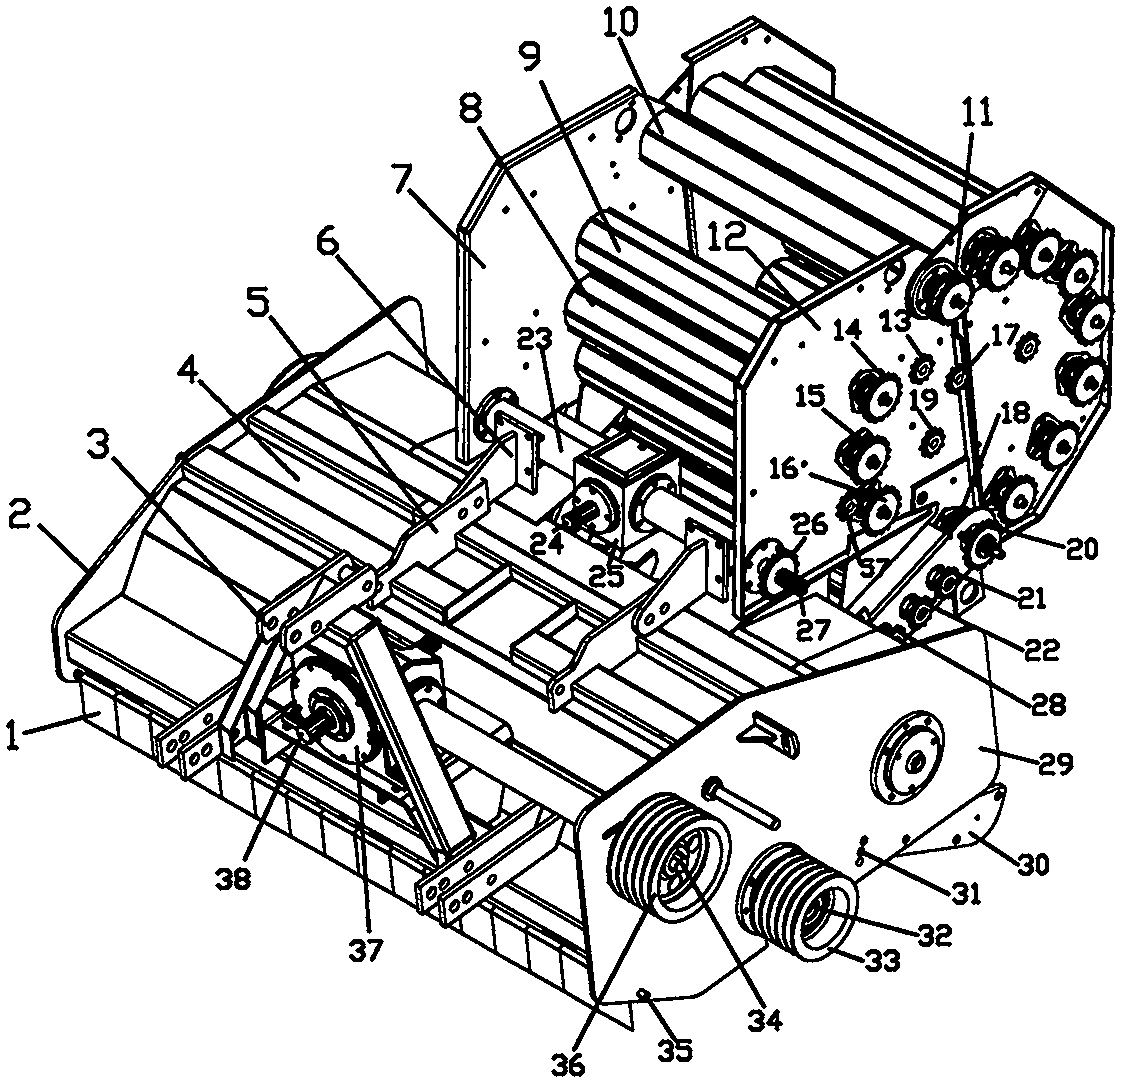 A straw harvesting,smashing and collective rubbing device for a roll bale press baler